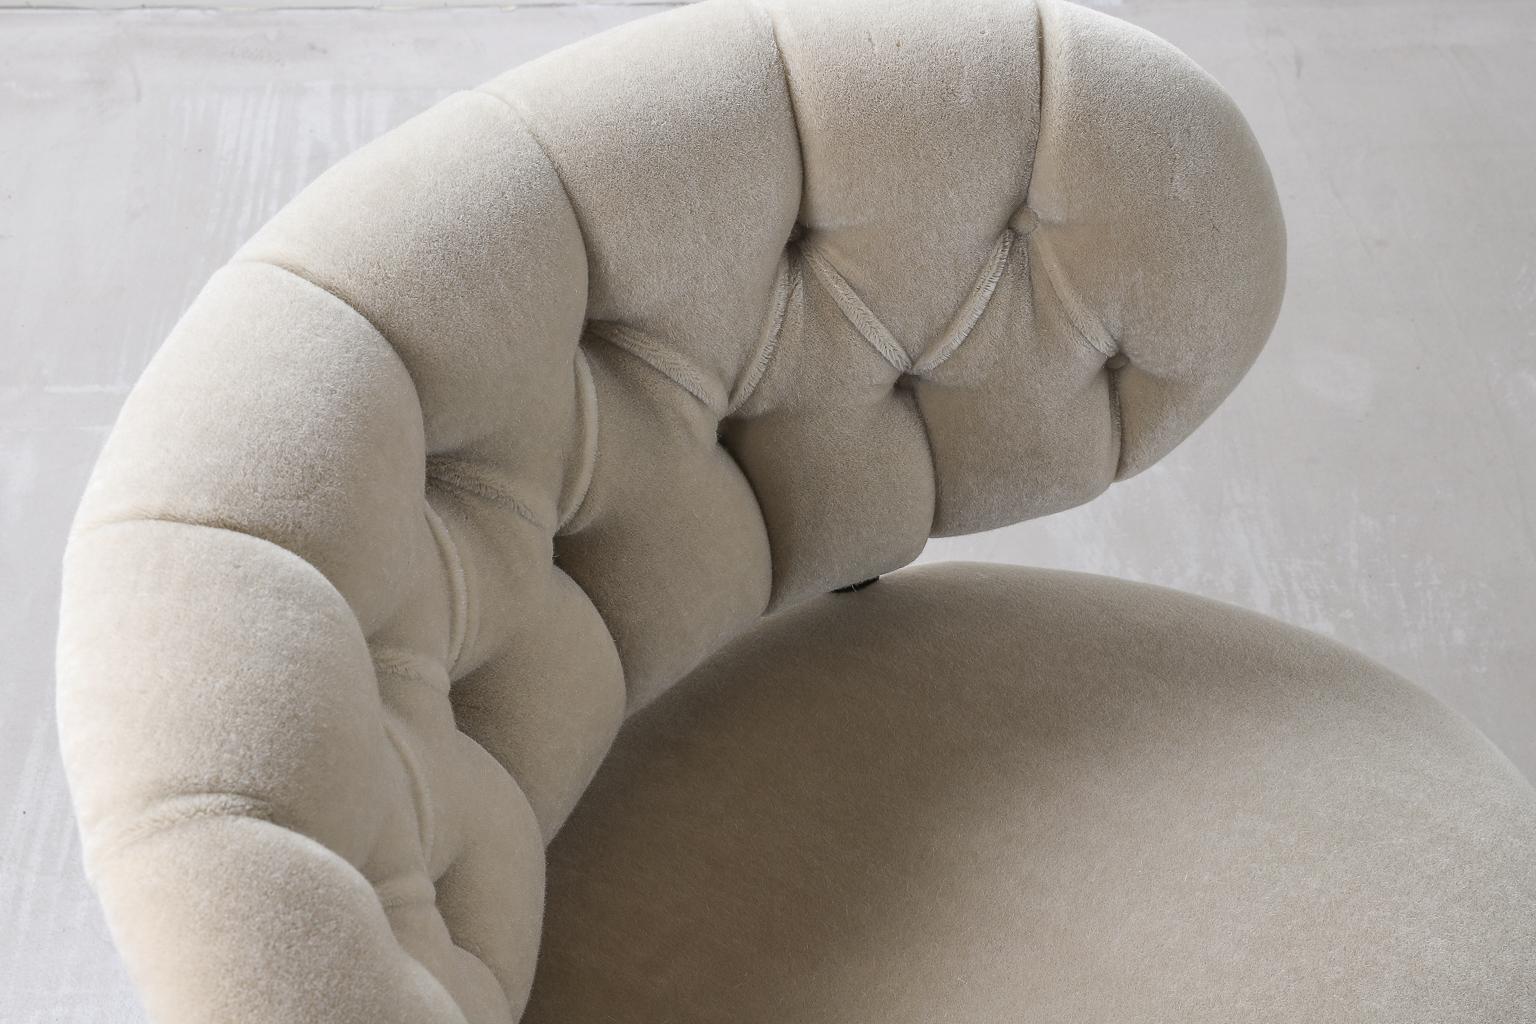 Armchair by Otto Schulz 1930s-1940s Upholstered in Bespoke Mohair 6